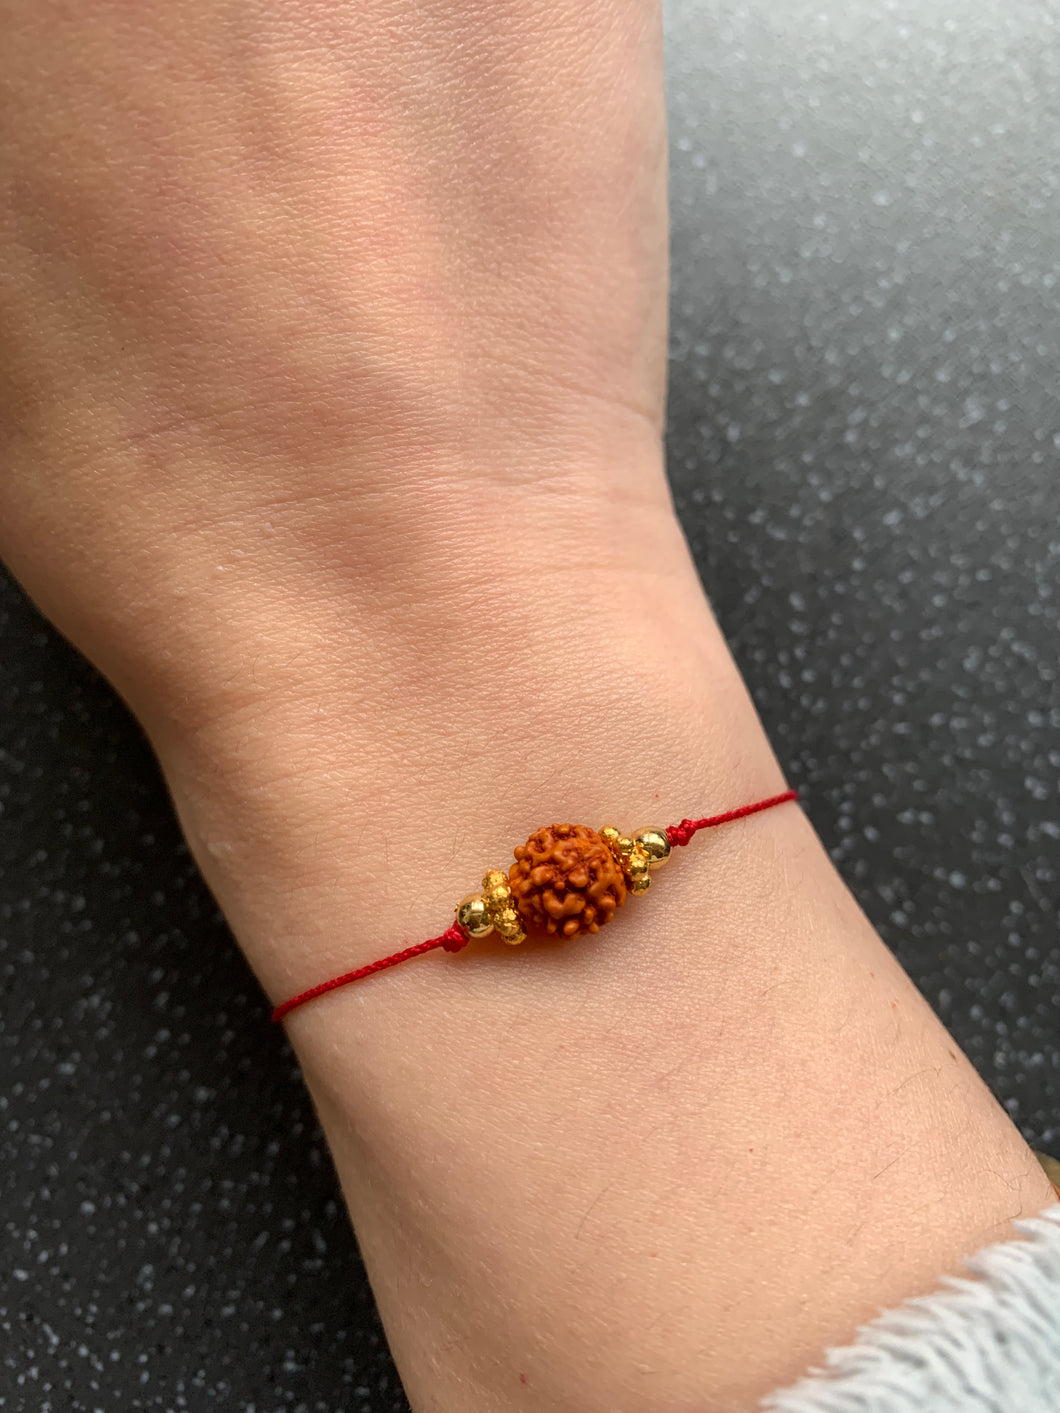 EXTREMELY Lucky Rudraksha Intention Tie Bracelet for Protection, Wealth, Focus, Anxiety, Stability & Love